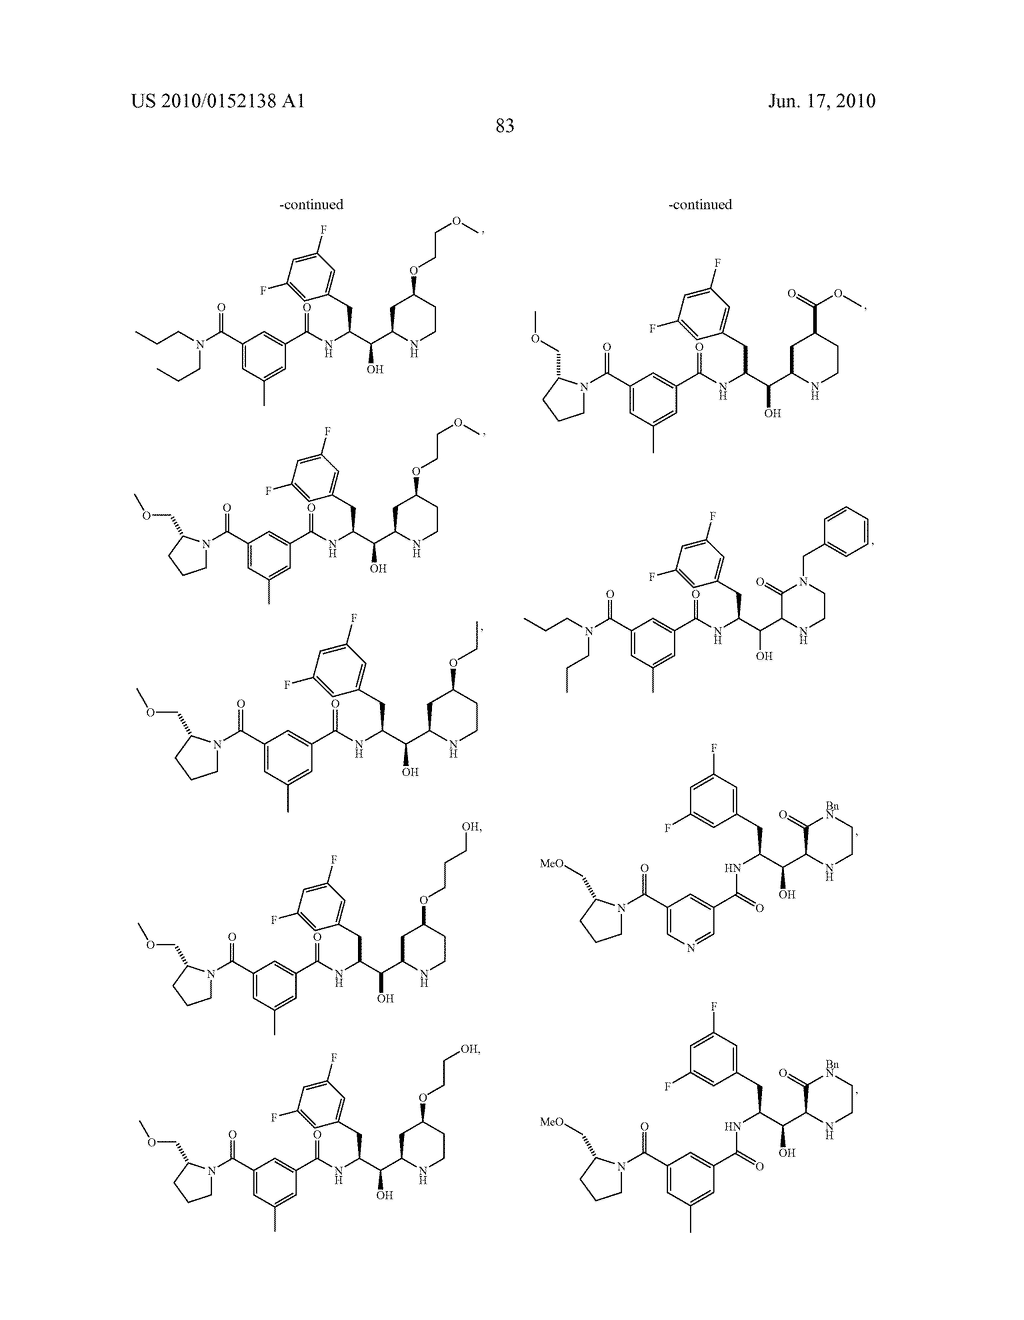 CYCLIC AMINE BACE-1 INHIBITORS HAVING A BENZAMIDE SUBSTITUENT - diagram, schematic, and image 84